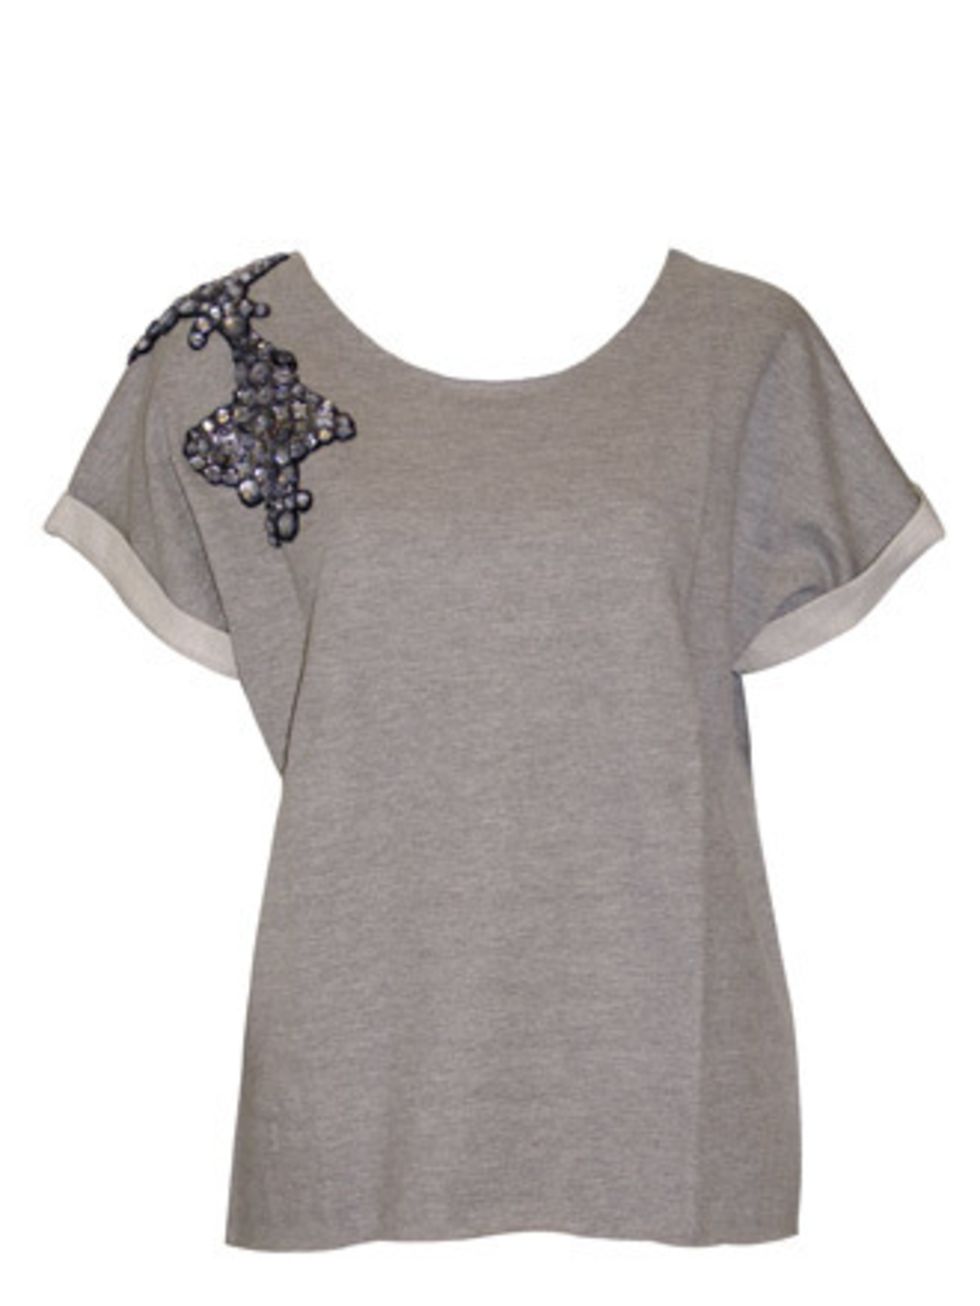 <p>Whether worn with smart trousers or ripped denim shorts, thanks to the good quality fabric and embellished detail, this will be your go-to Tee for the summer months and beyond. </p><p>T-Shirt, £170 by <a href="https://www.o2oxygen.com/products/394/56/g